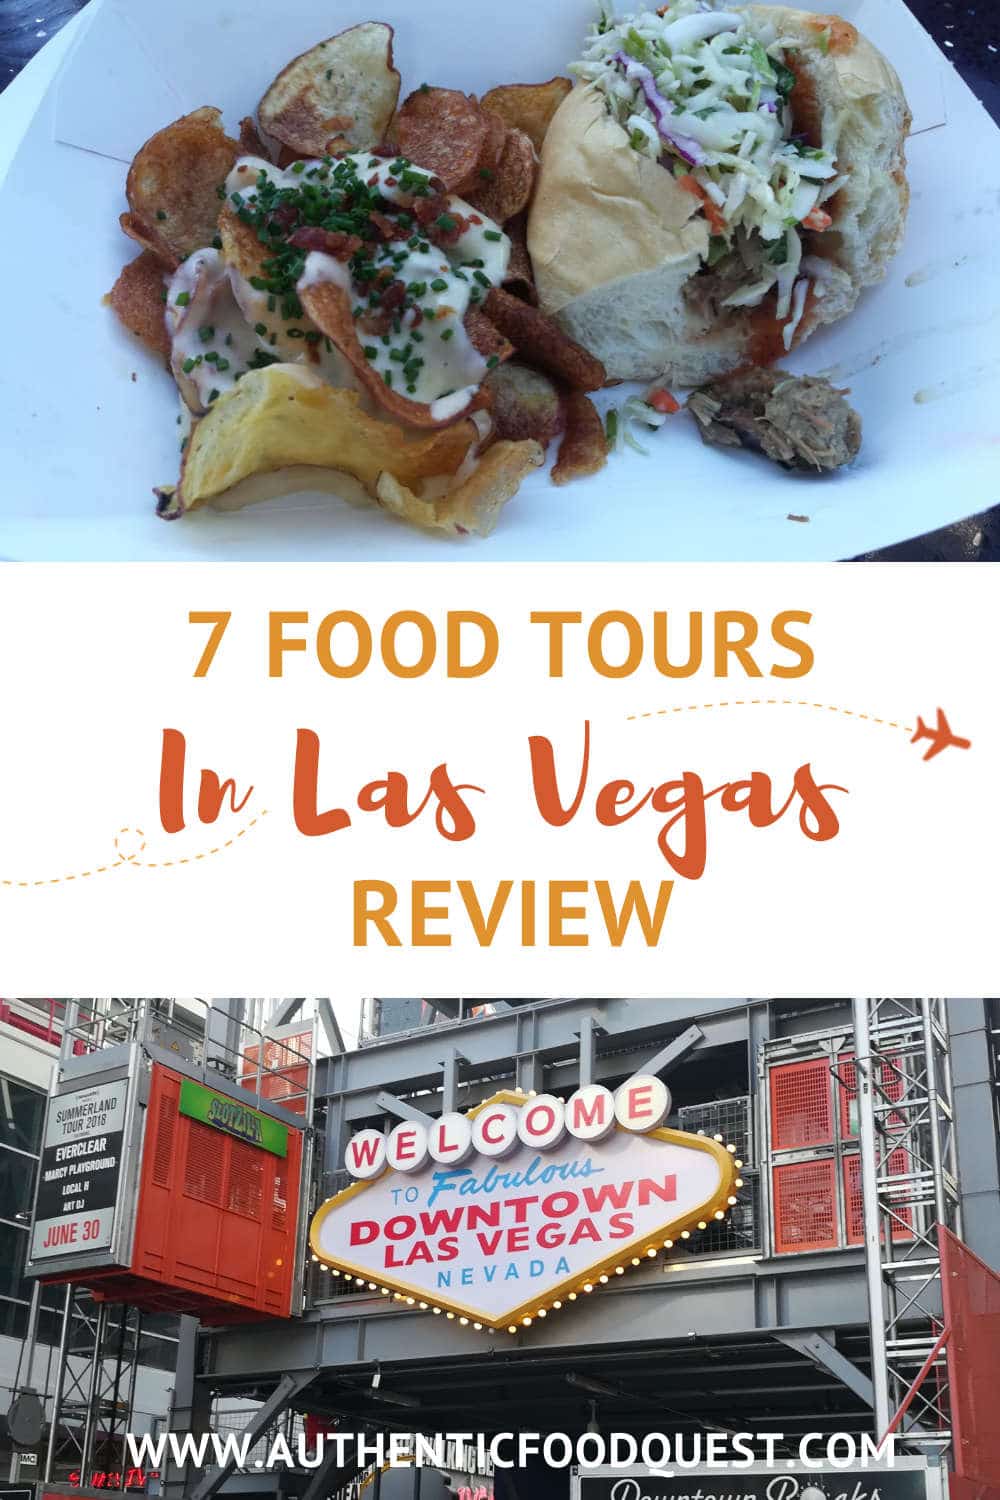 The 7 Most Tasty Las Vegas Food Tours - [Updated 2022]